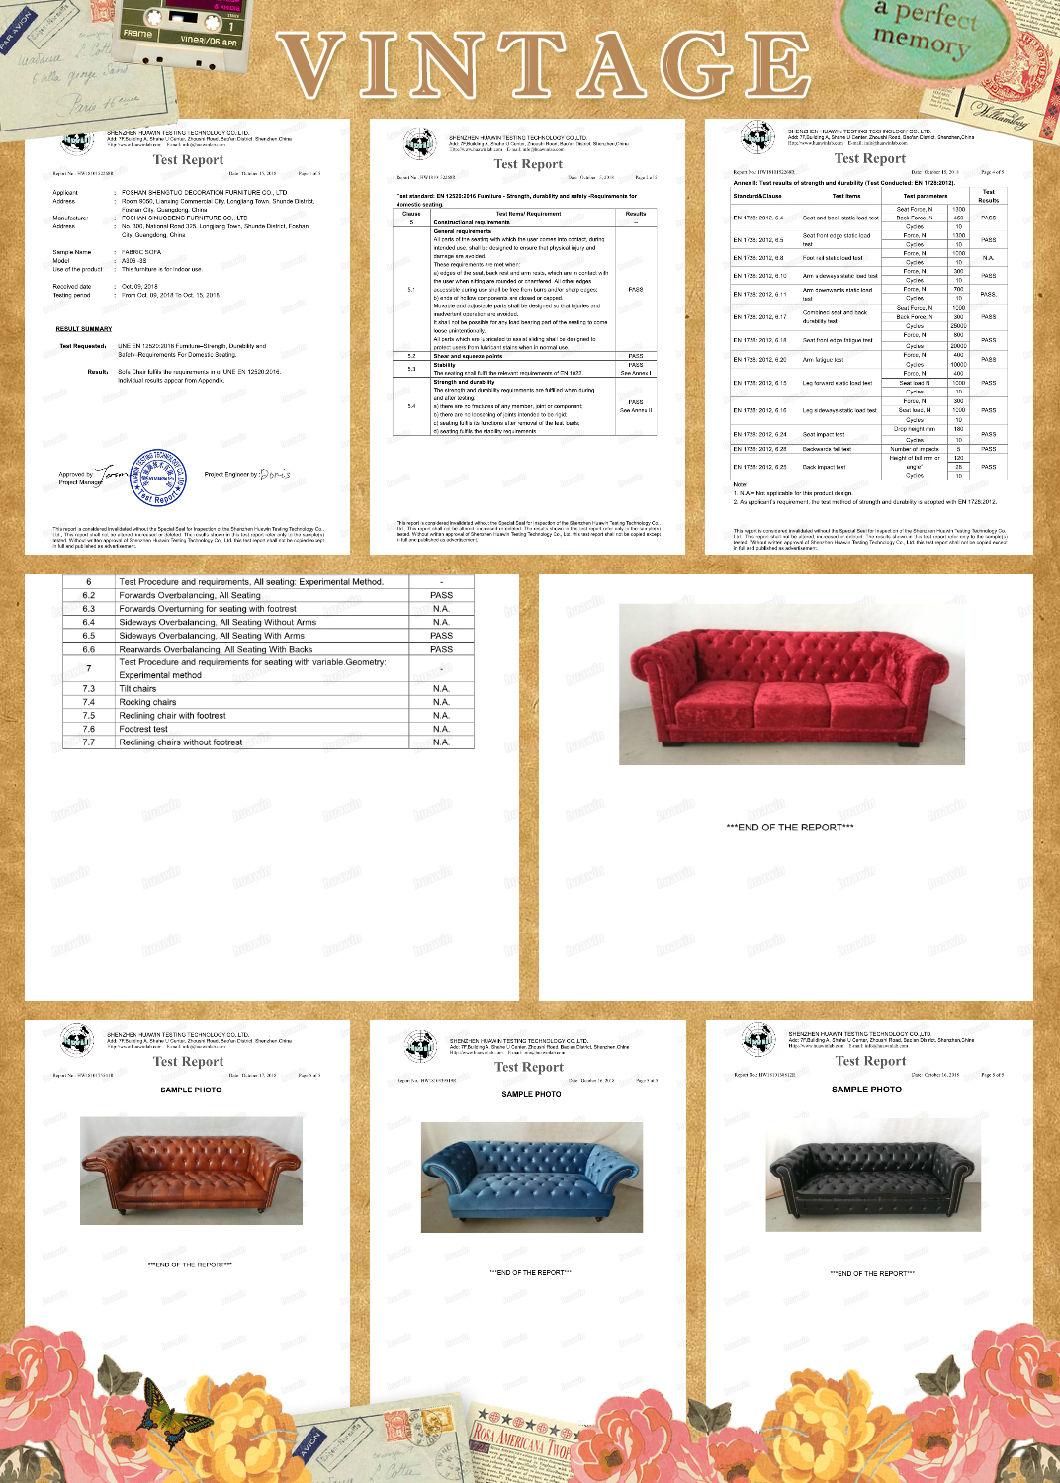 Modern European Cheap Velvet Fabric Tufted Customized Size Project Orded Public Area Hotel Lobby Villa Home Living Floor Chesterfield Sofa Set Furniture